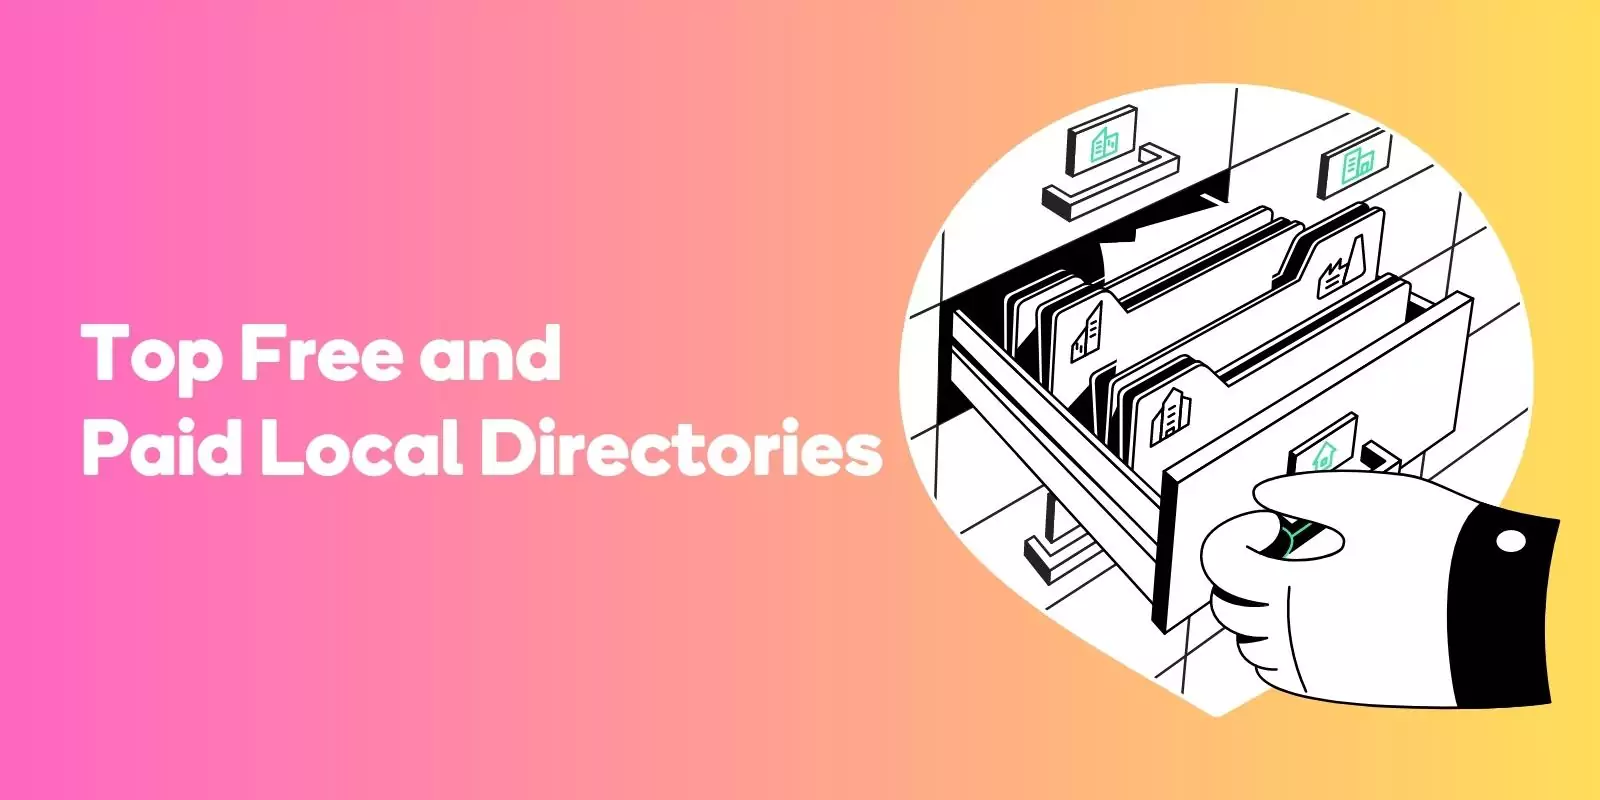 Top Free and Paid Local Directories